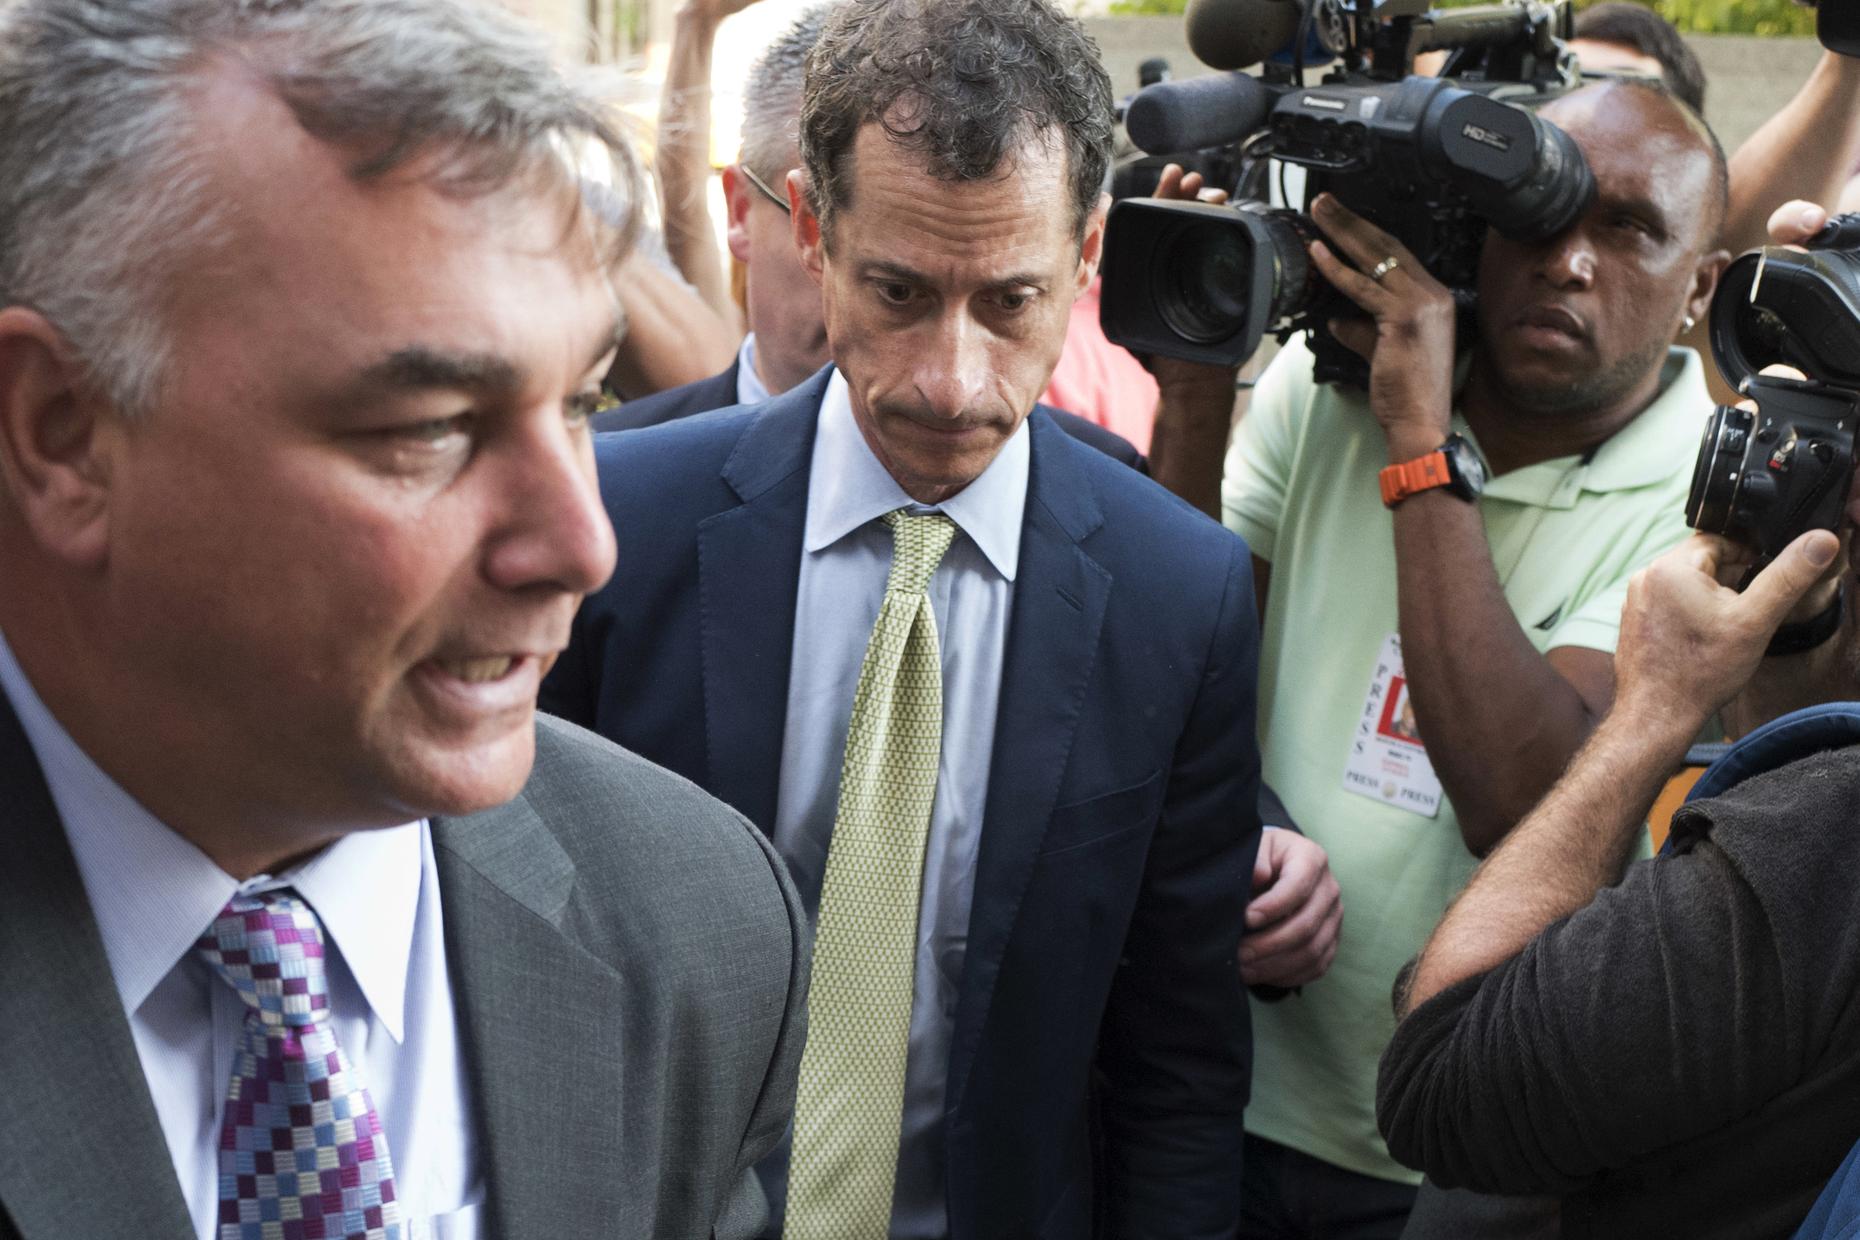 Anthony Weiner Sentenced To 21 Months In Prison For Sexting Wnyc 1059